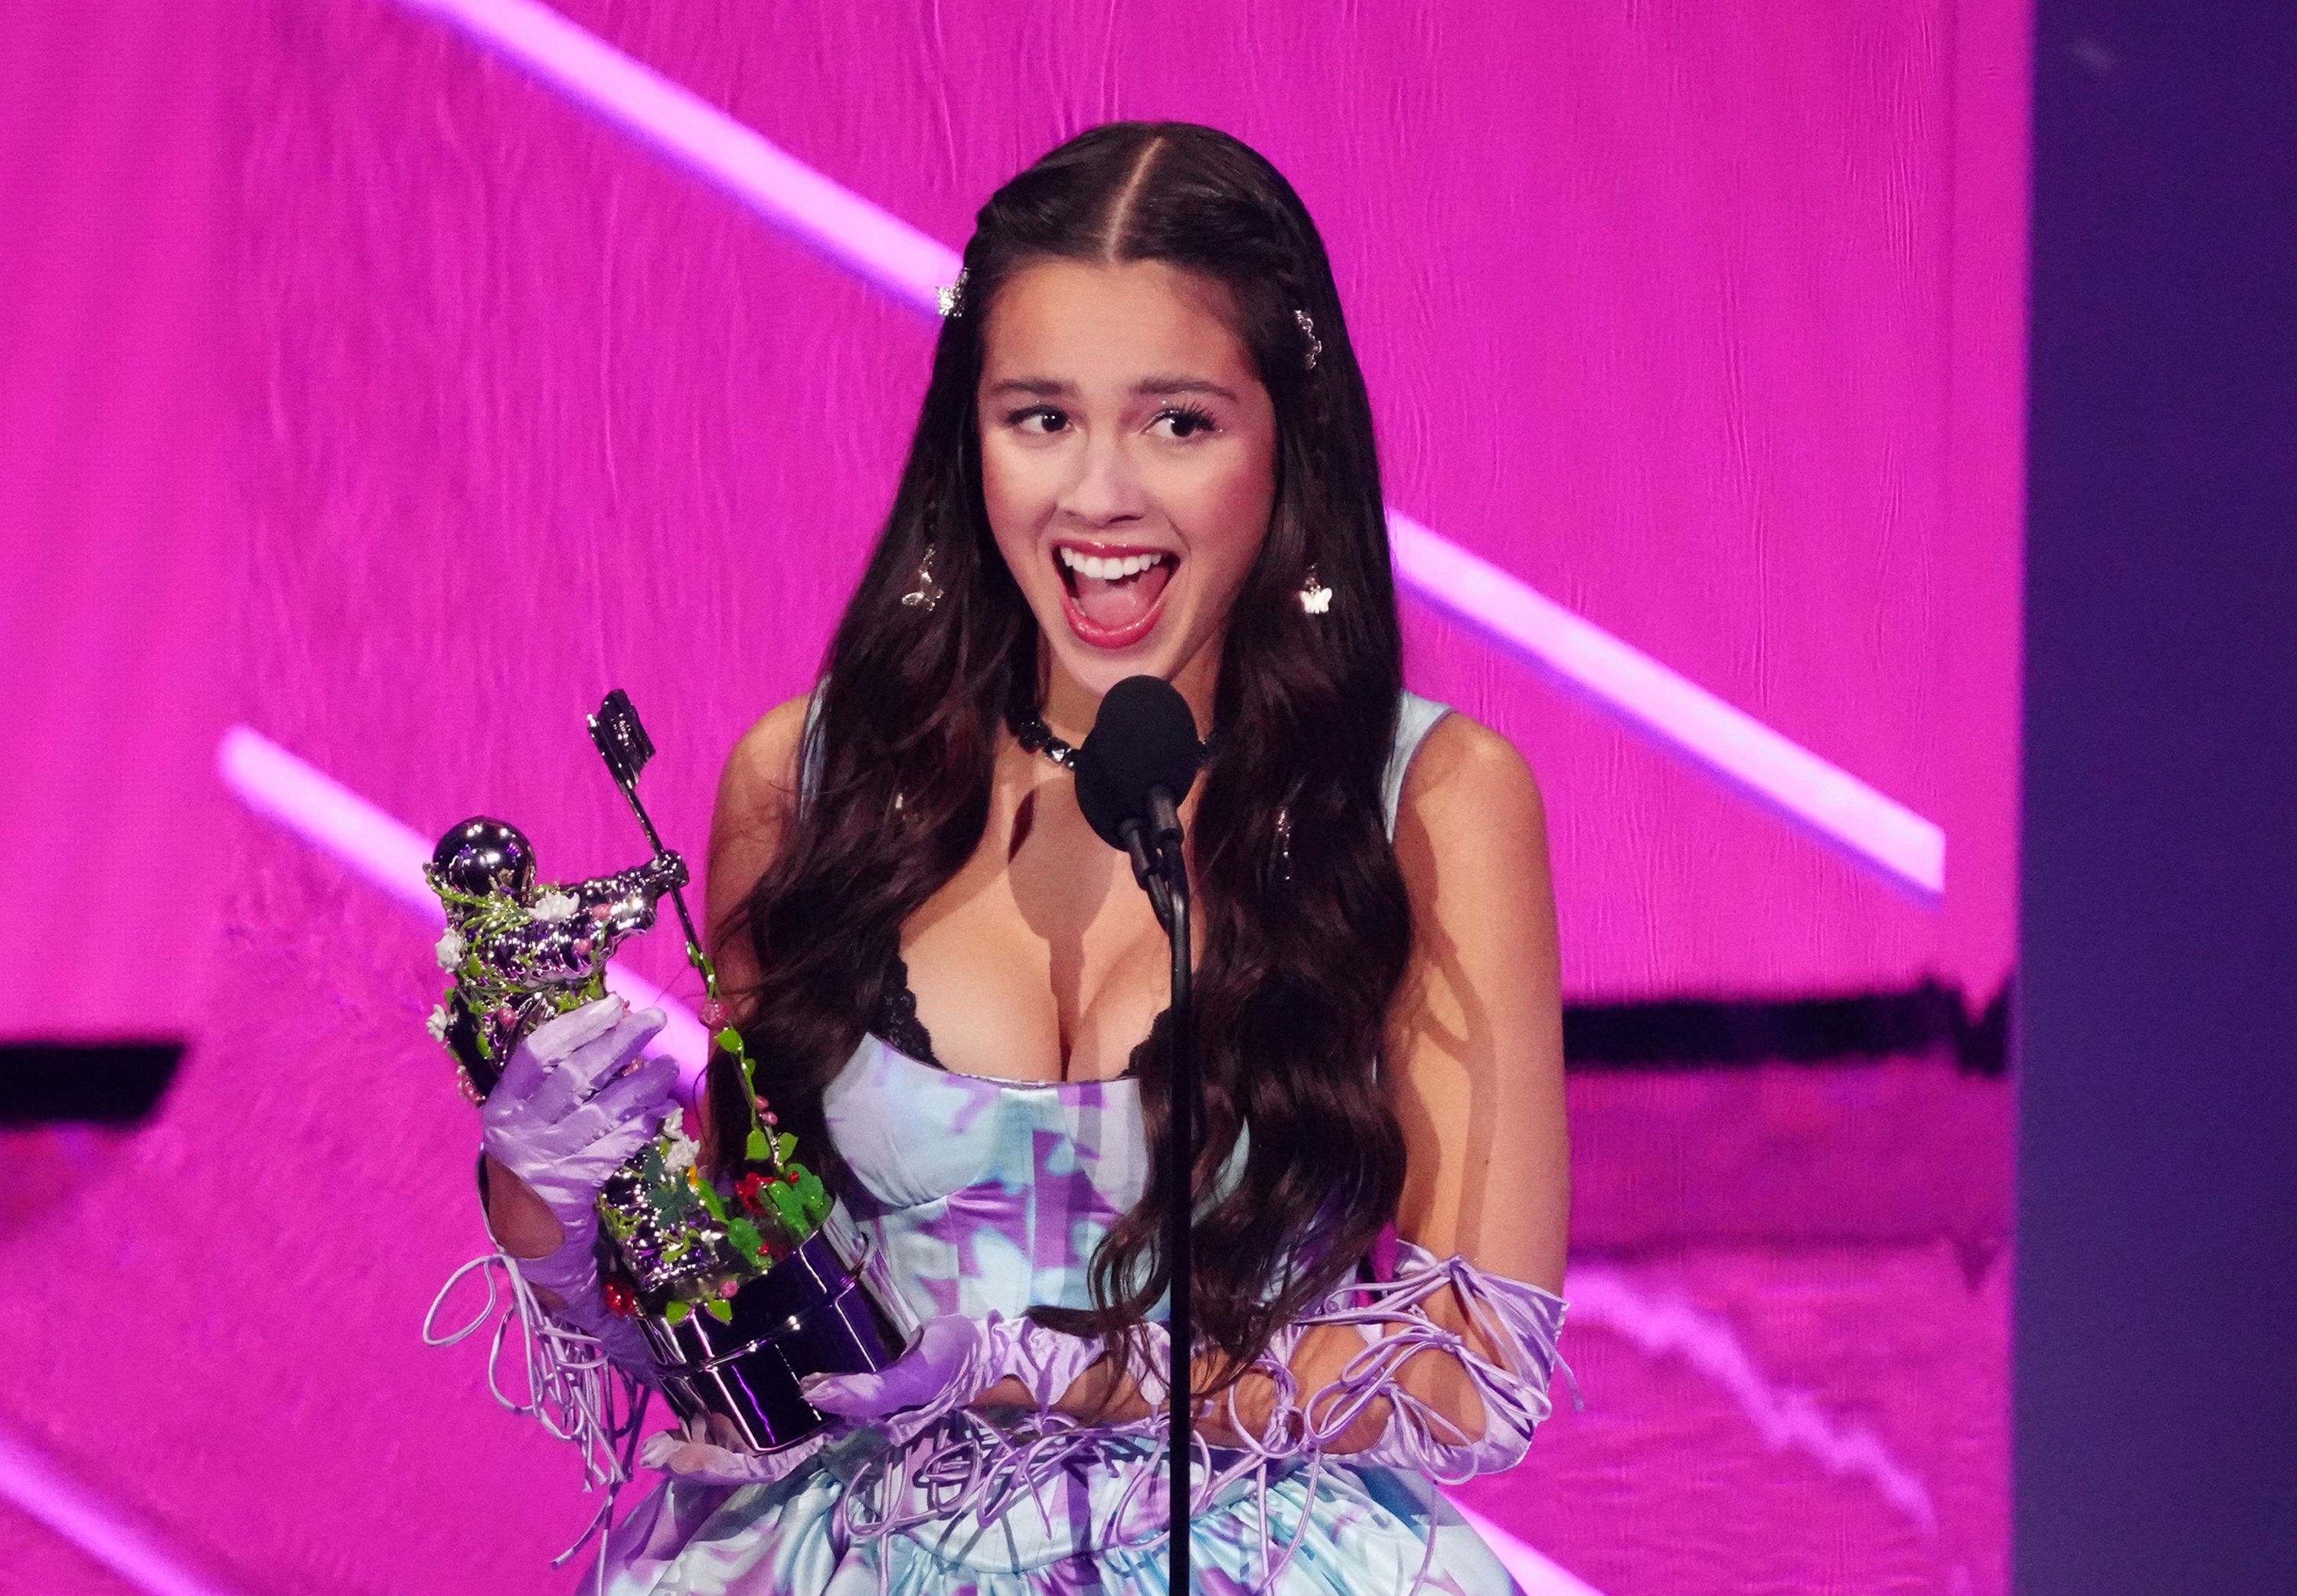 Bich Nigro Chudai Video - Here's everything you might not know (but should!) about three-time MTV VMA  winner Olivia Rodrigo | Gallery | Wonderwall.com